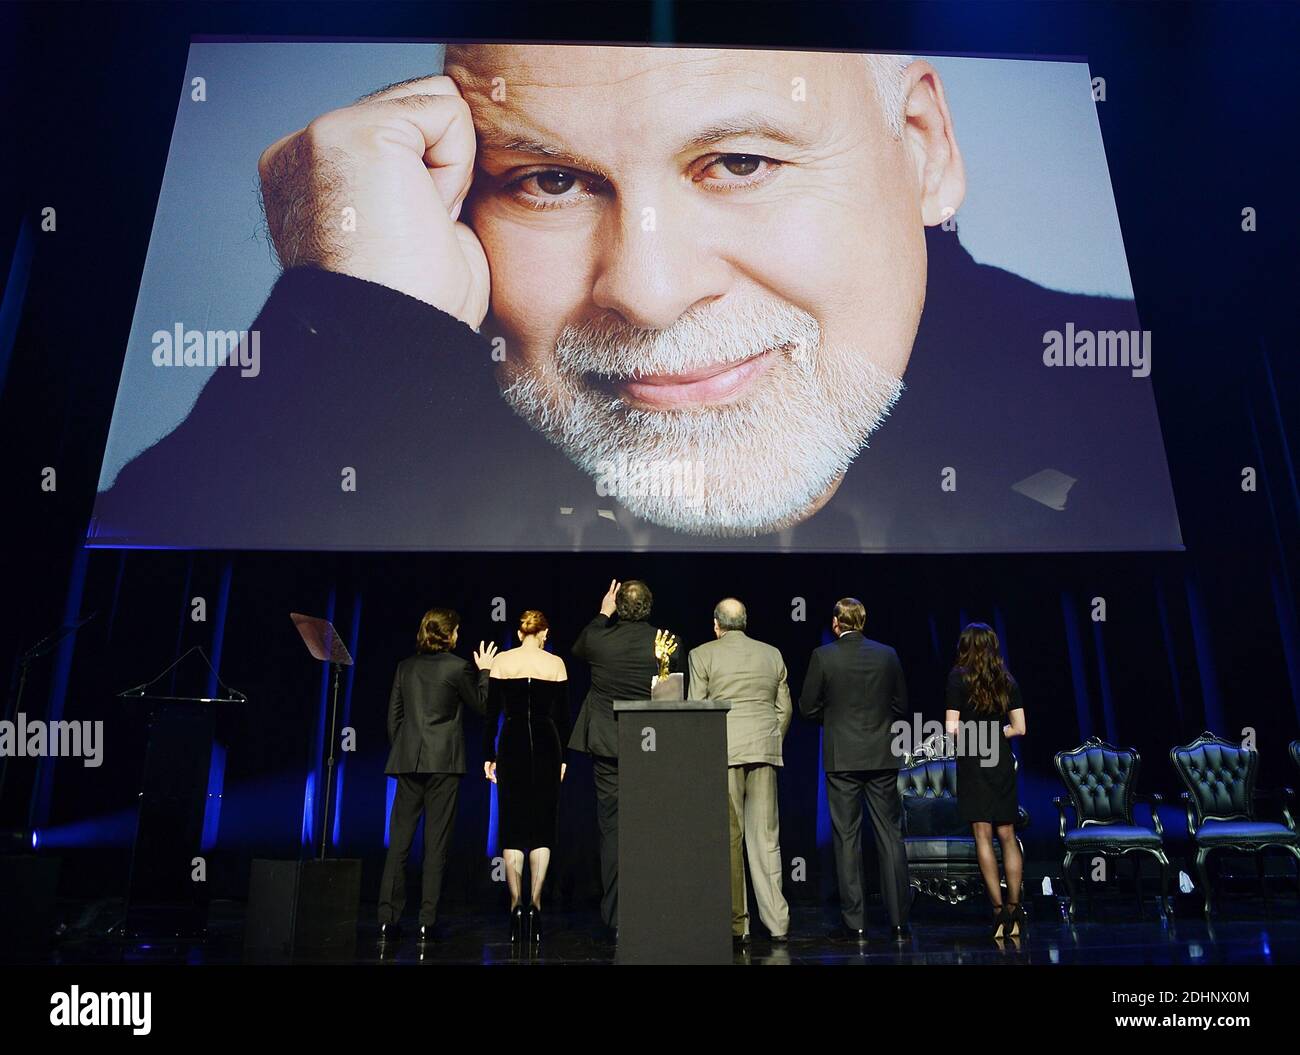 Rene-Charles Angelil, Celine Dion, Patrick Angelil, Andre Angelil, Jean-Pierre Angelil and Anne-Marie Angelil attend Rene Angelil's memorial ceremony at the Colosseum at Caesars Palace on February 3, 2016 in Las Vegas, Nevada, USA. Photo by Denise Truscello/Caesars Palace via ABACAPRESS.COM Stock Photo